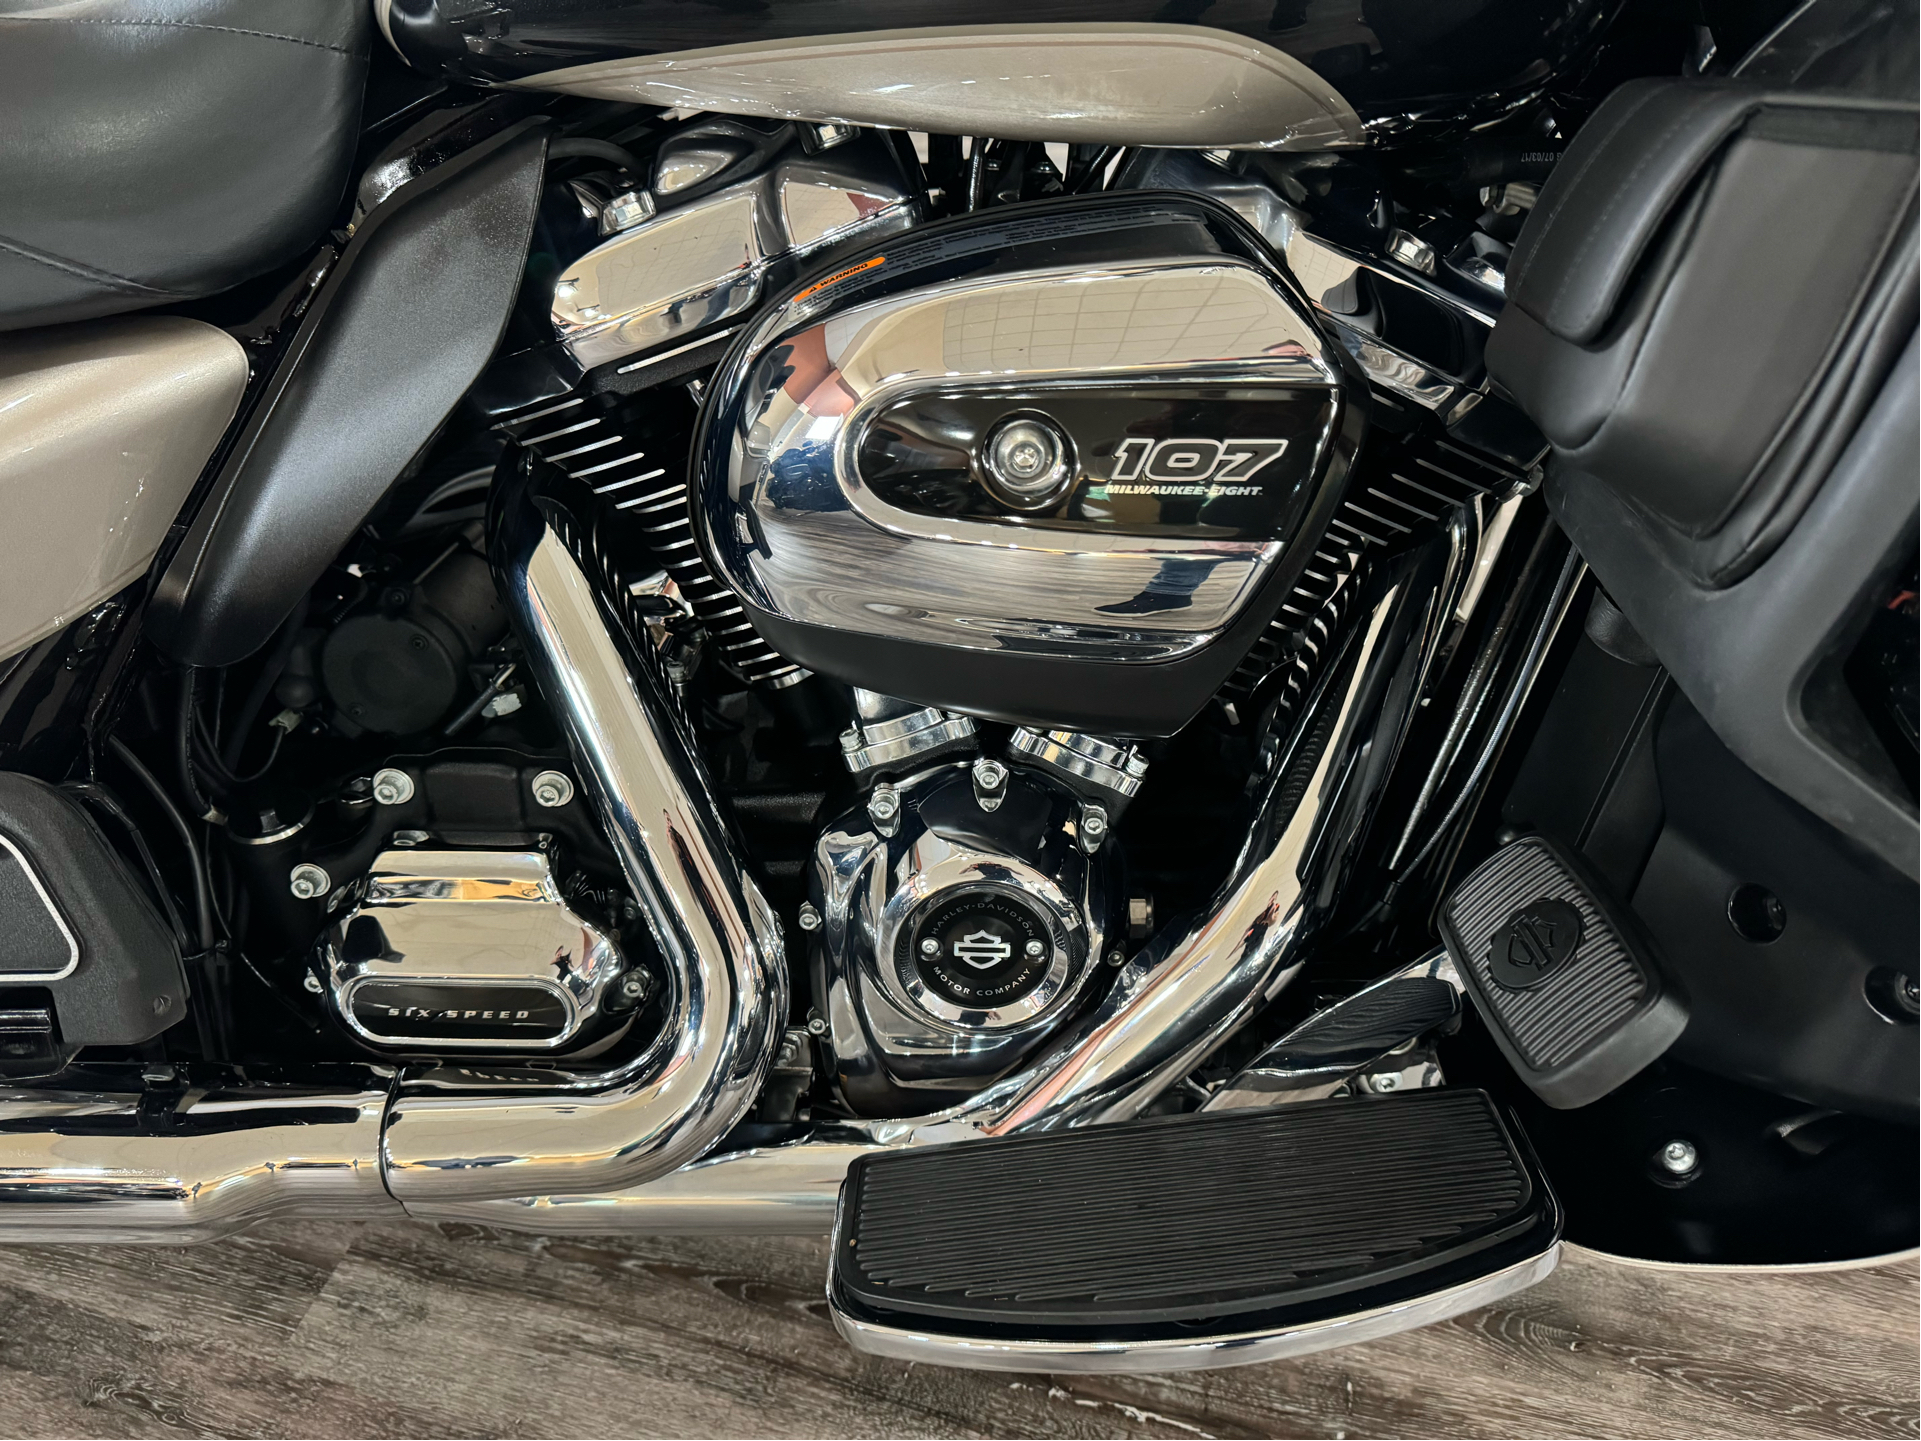 2018 Harley-Davidson Road Glide® Ultra in Knoxville, Tennessee - Photo 7